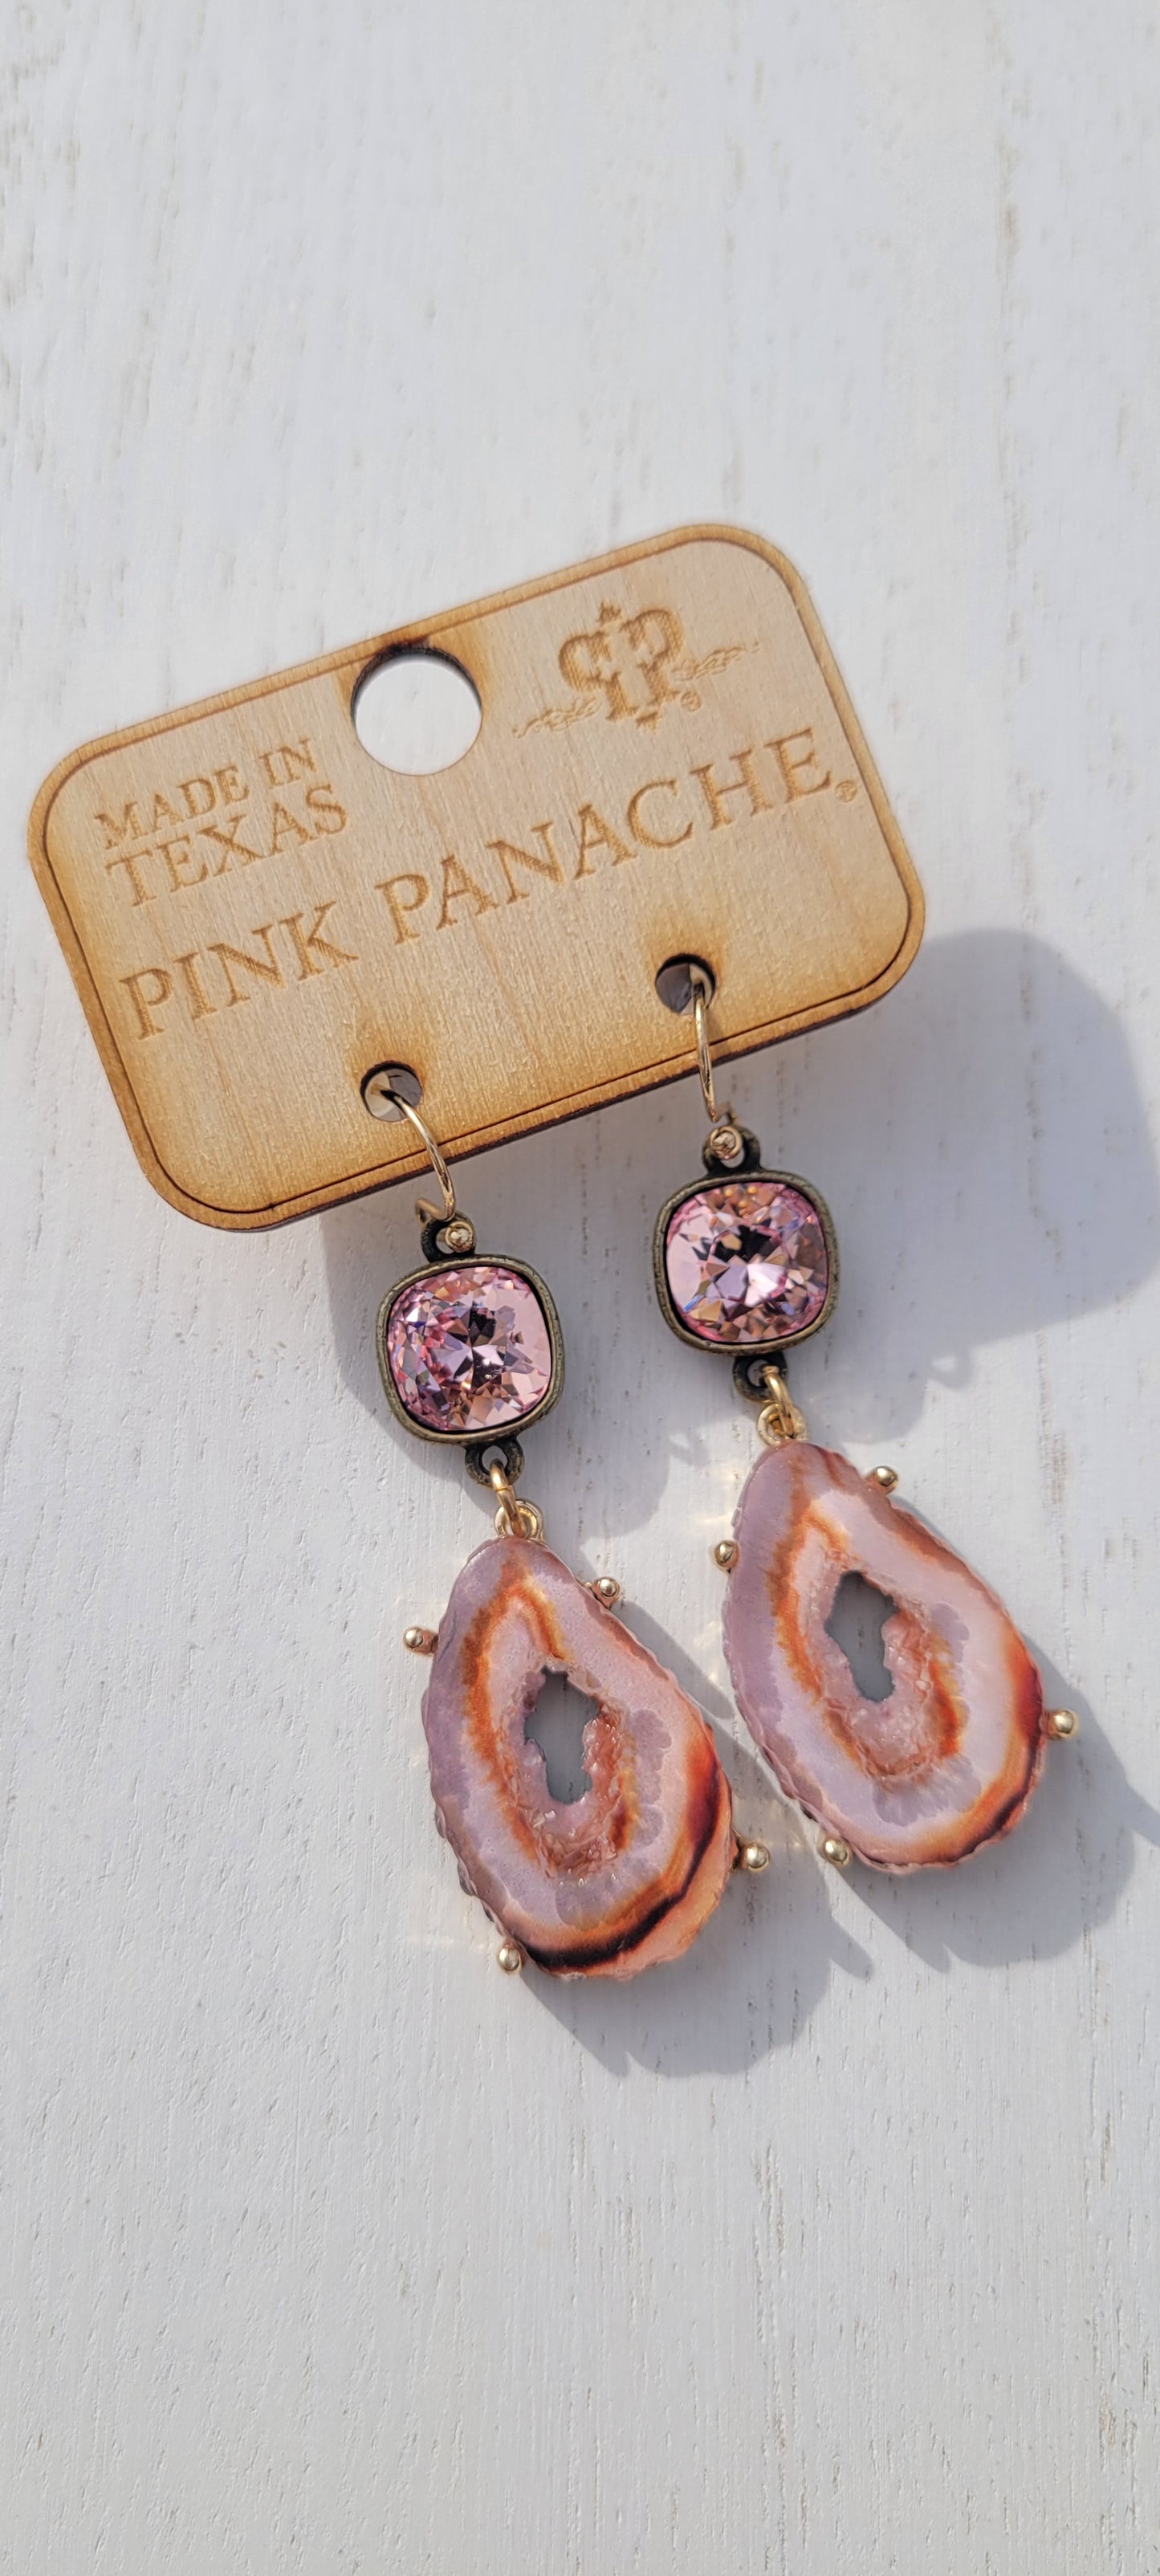 Pink Panache Earrings Color: 10mm bronze/light rose cushion cut connector with pink open druzy earring Limited supply!   